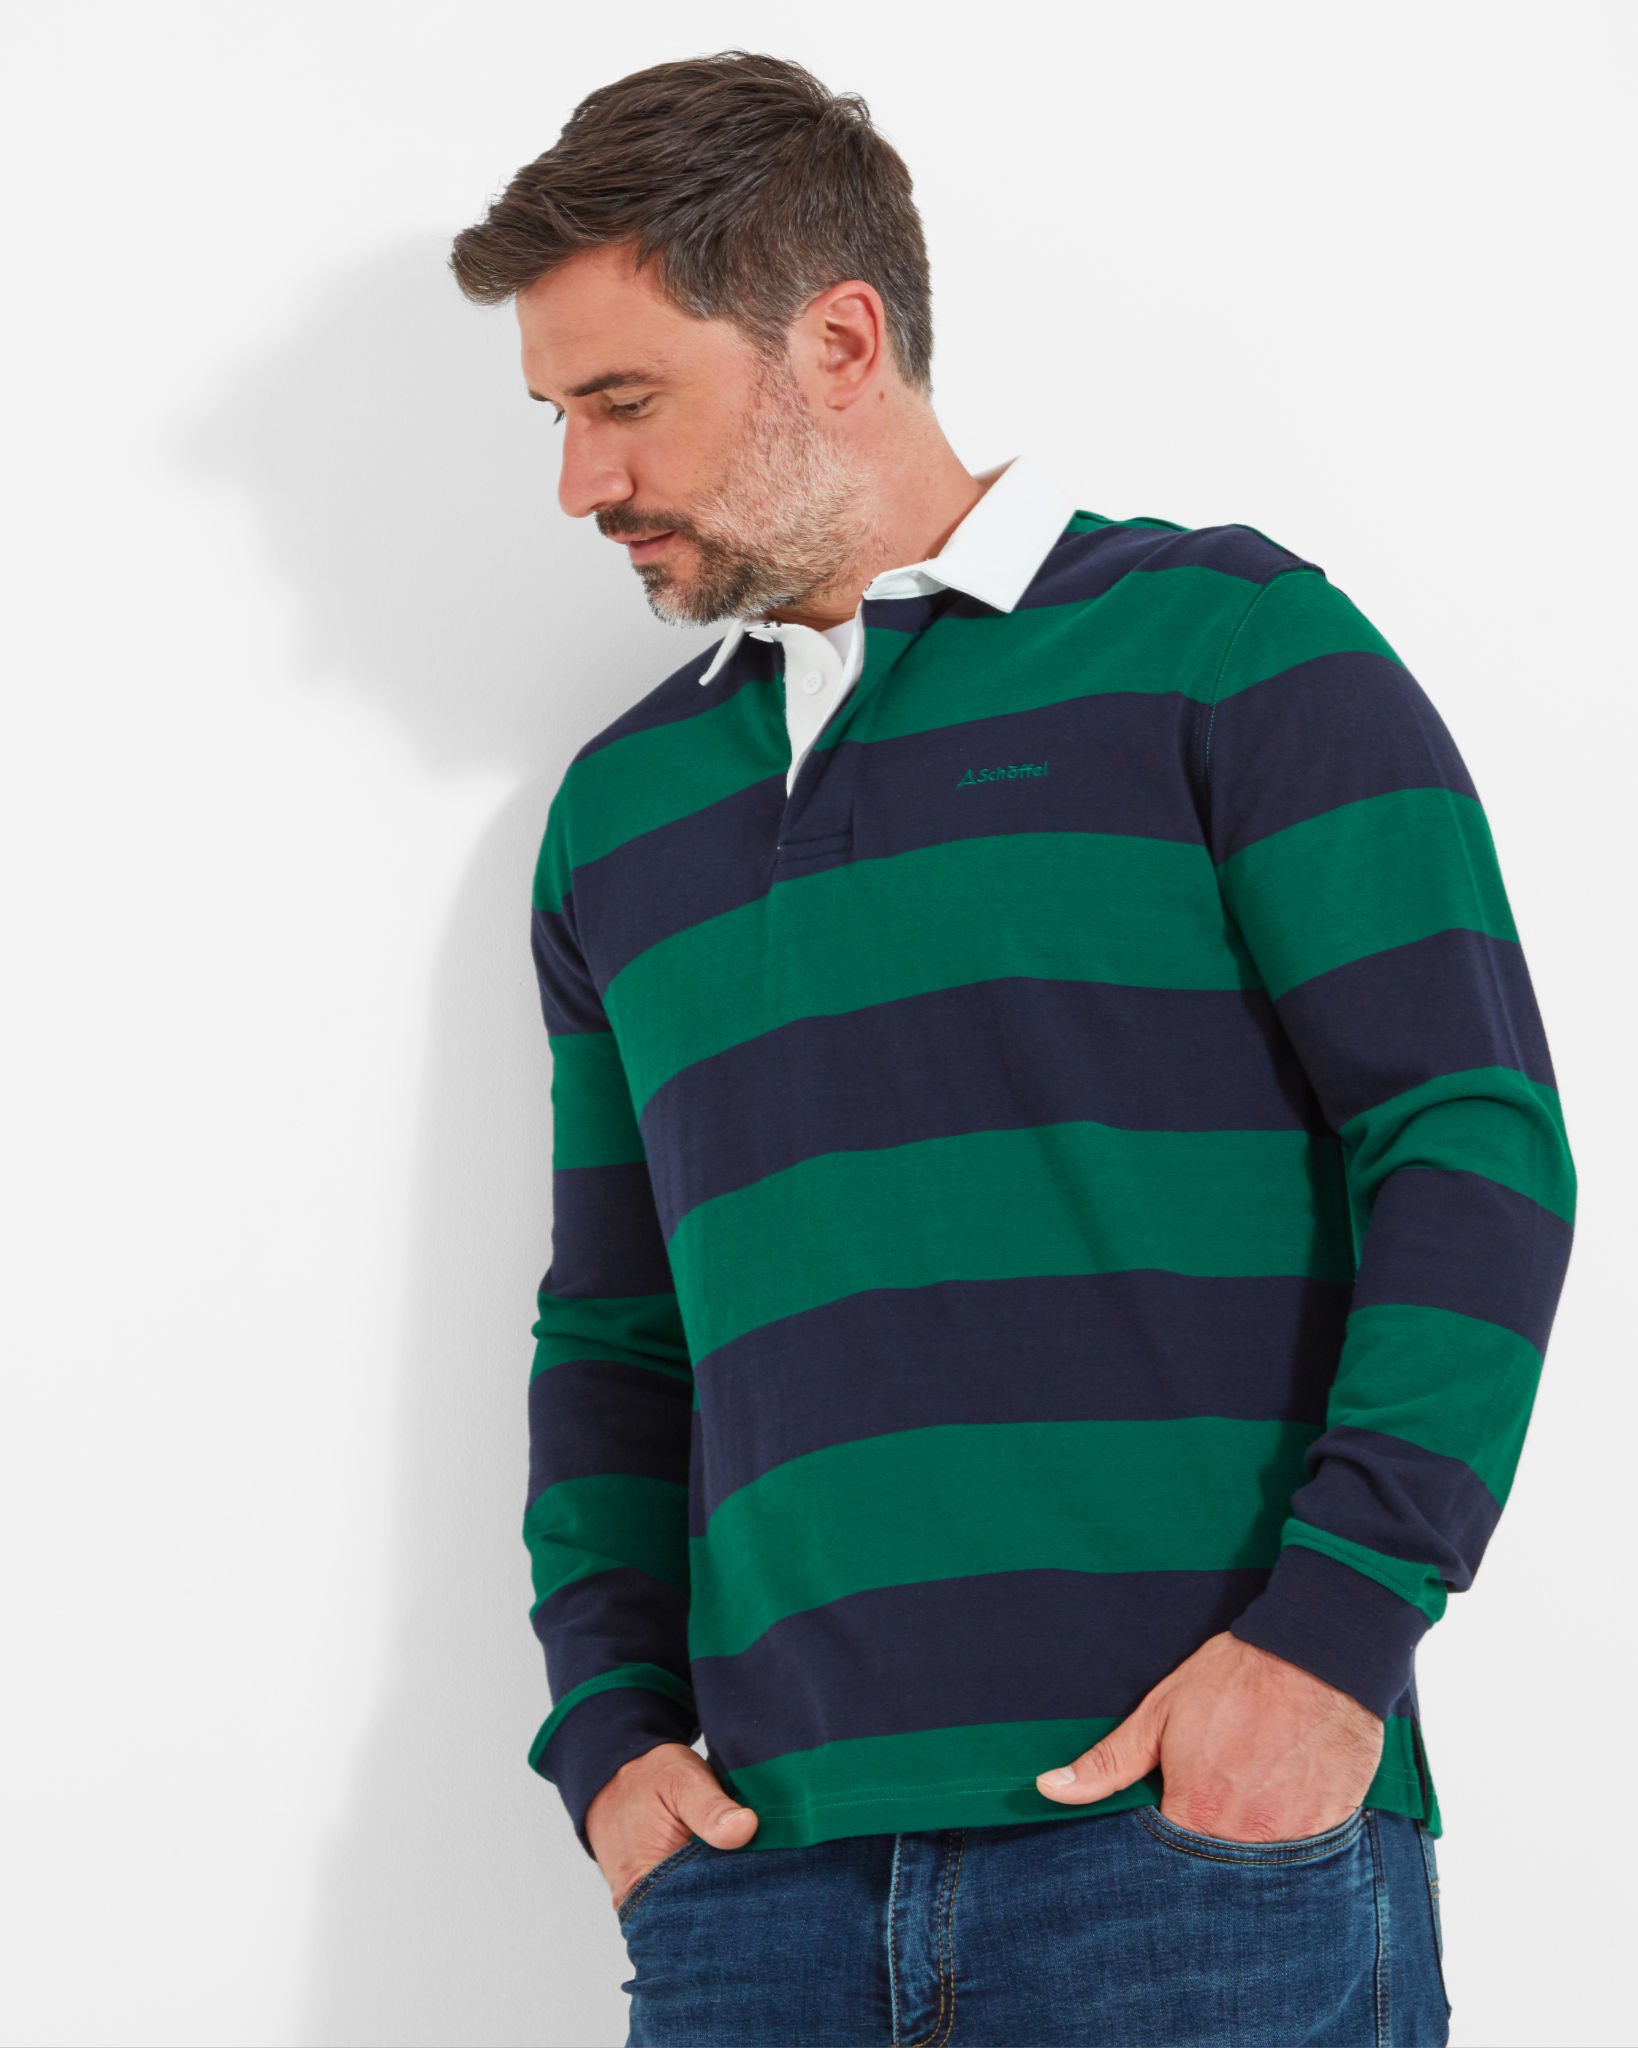 St Mawes Rugby Shirt - Navy/Green Stripe